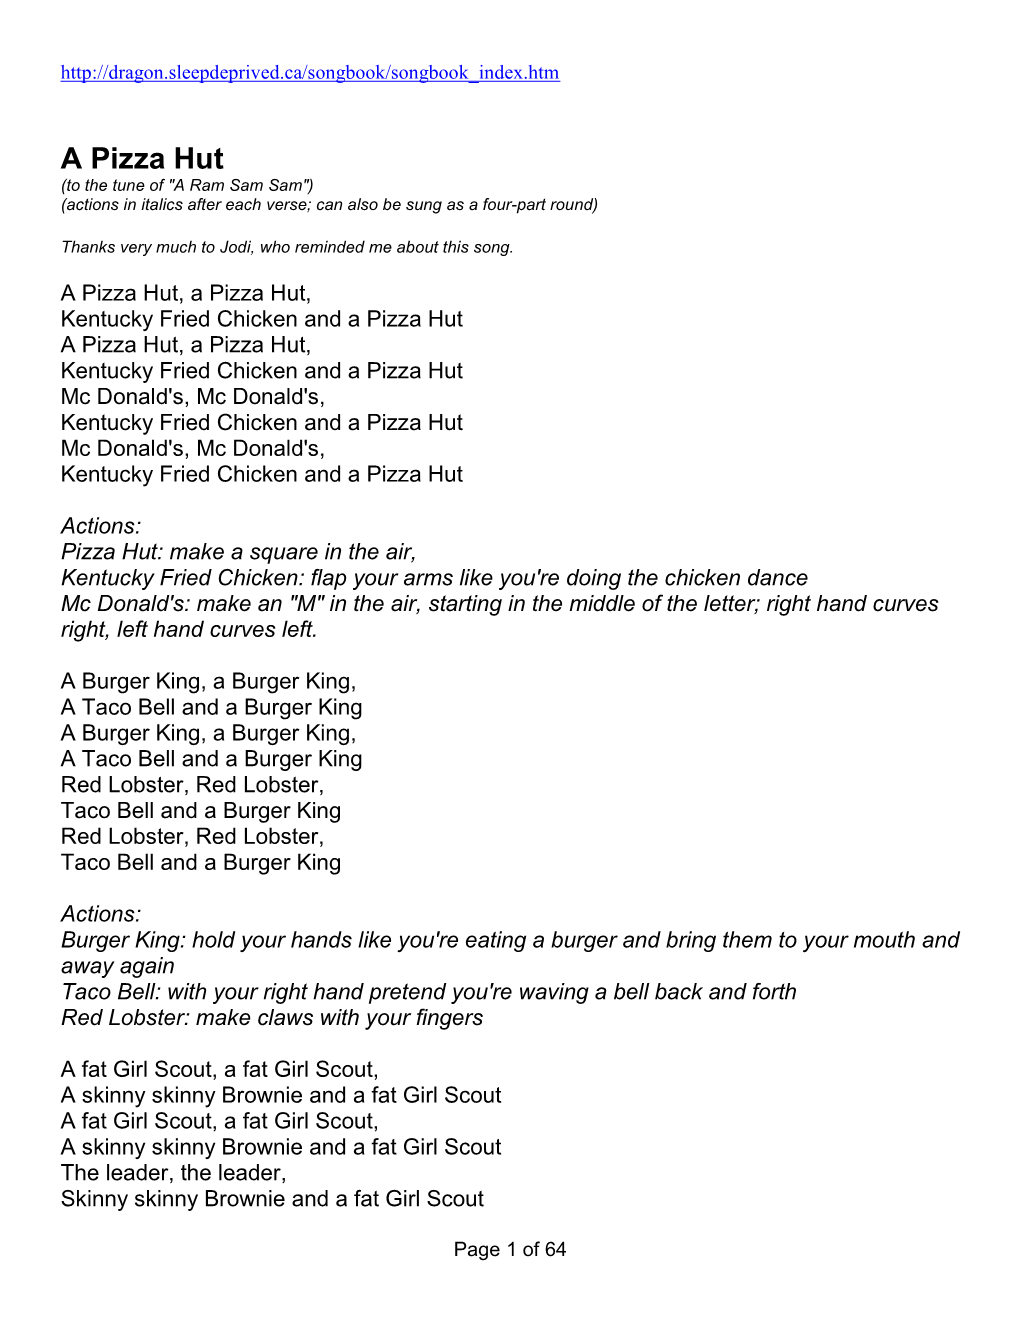 A Pizza Hut (To the Tune of "A Ram Sam Sam") (Actions in Italics After Each Verse; Can Also Be Sung As a Four-Part Round)